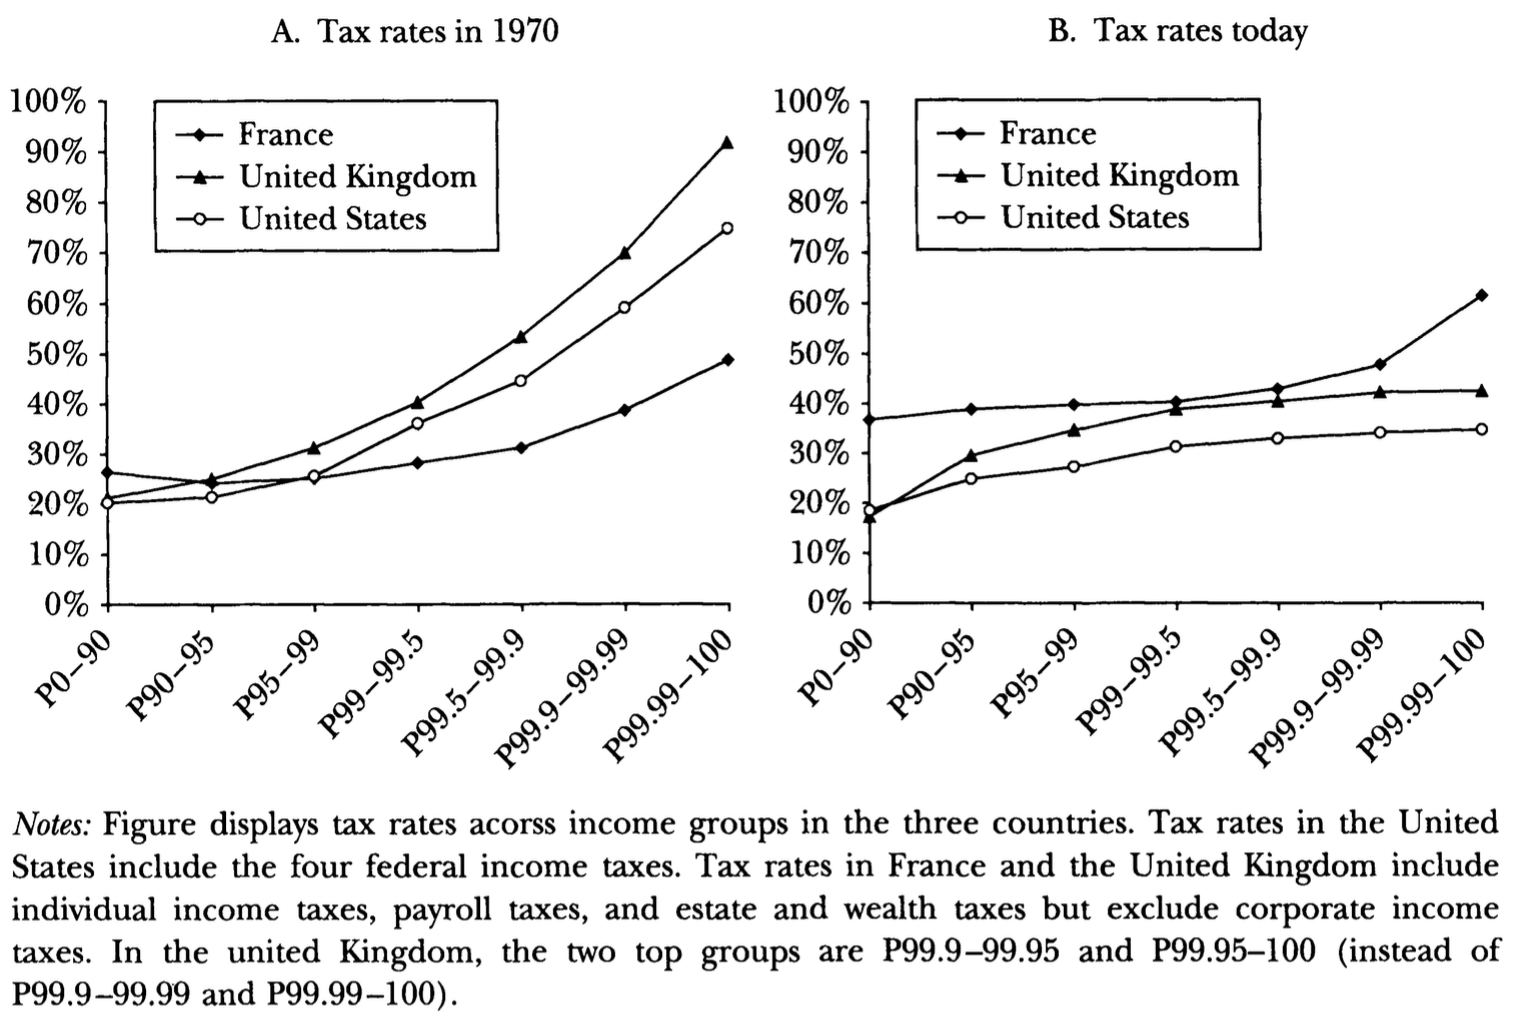 Average tax rates by income groups in France, the United Kingdom, and the United States, 1970 and 2005 – Figure 4 in Piketty and Saez (2007)<a class="ref" href="#note-15"><sup>15</sup></a>